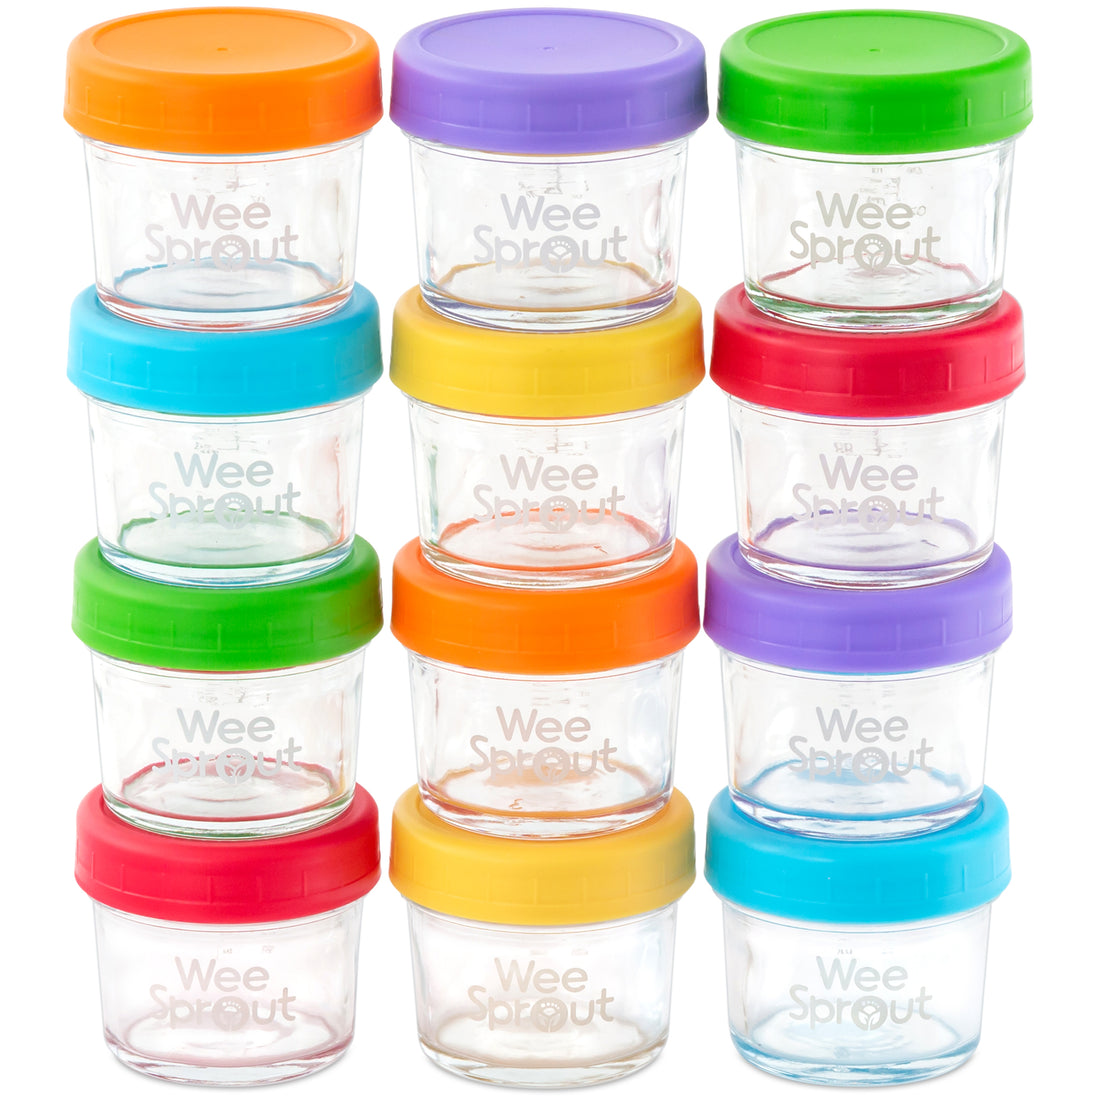 Superior Glass Baby Food Storage Containers - 6 Pack - 5 Oz Containers with  Airtight BPA-Free Locking Lids - Baby Food containers - Microwave &  Dishwasher Safe - Small Containers for Snacks Dips etc 